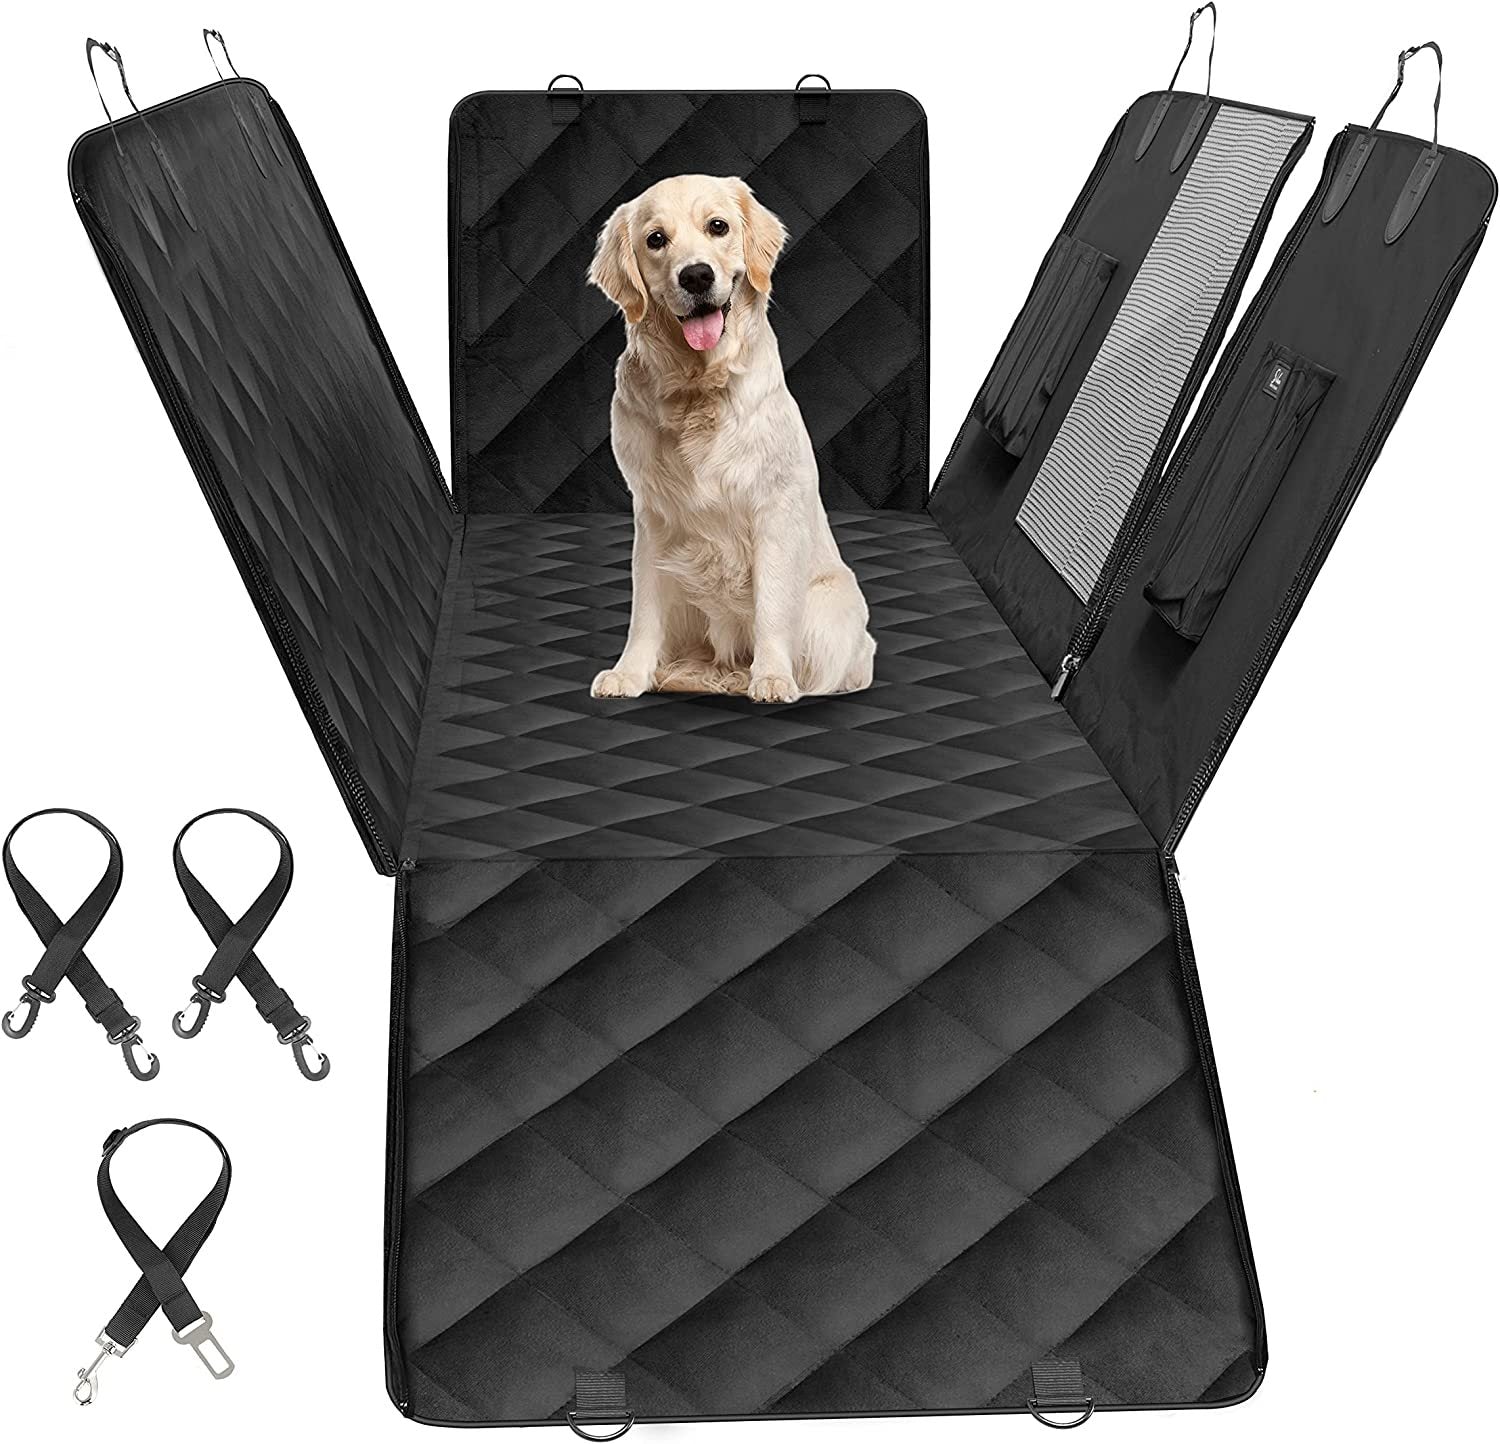 Simple Deluxe Dog Car Seat Cover for Back Seat, 100% black-oxford fabric